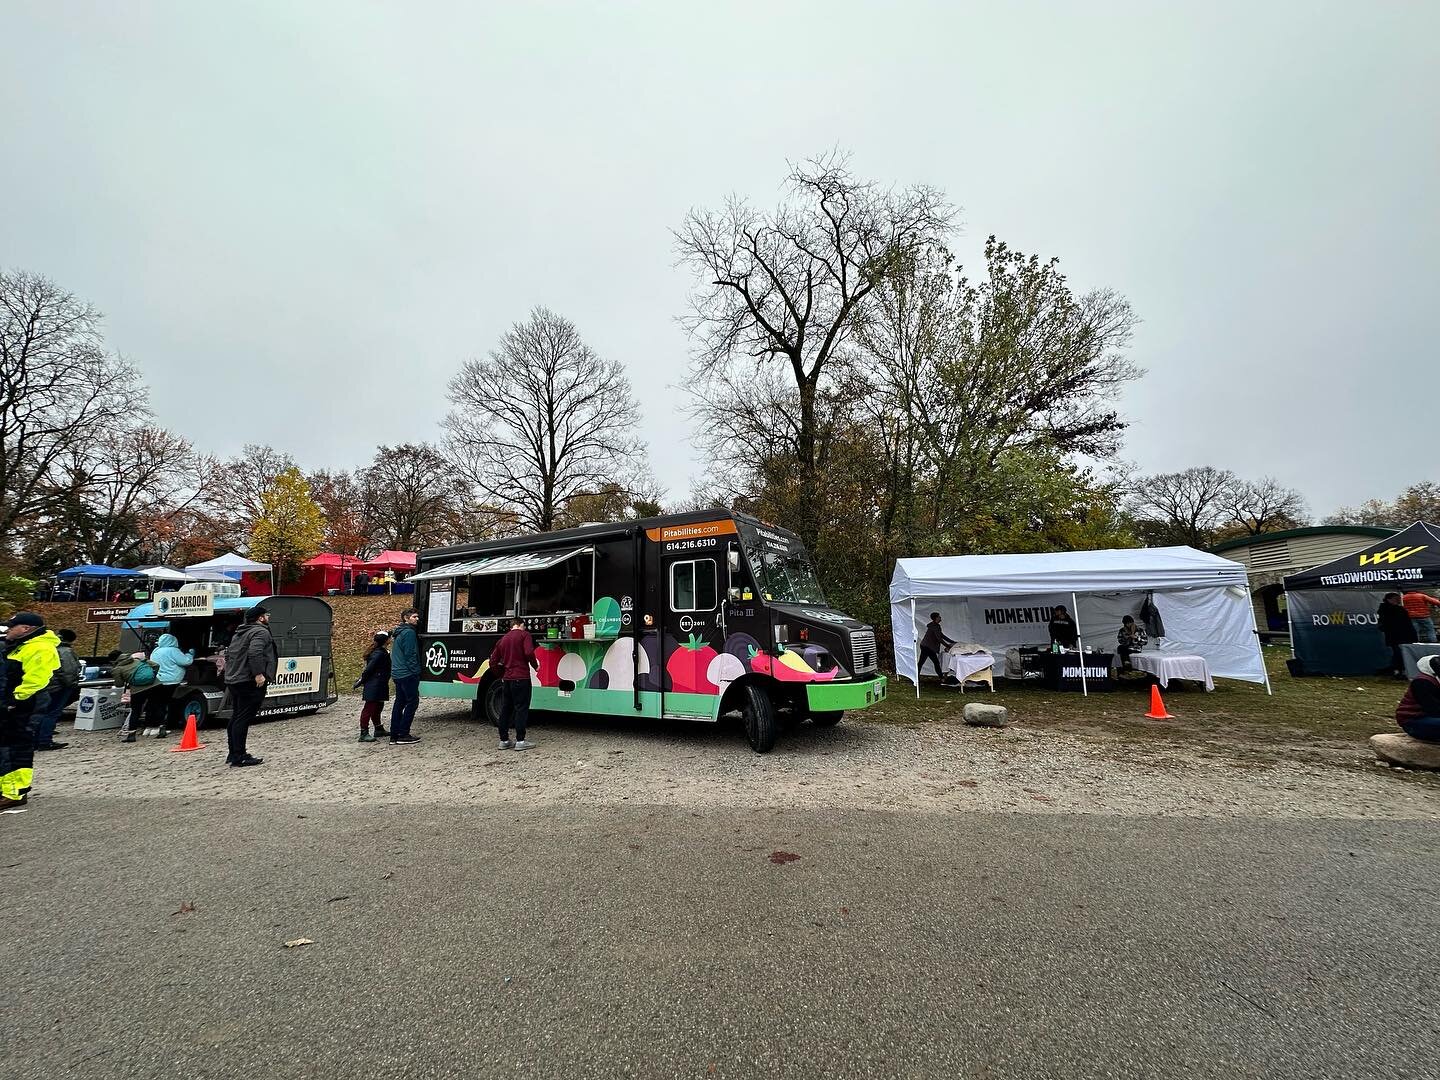 Thank you to our vendors who stuck through the cold, rainy and dreary weather!! 
@finedesignsofficial @backroomcoffee @pitabilities @momentum_sportmassage @rowhouseupperarlington 

Hopefully see you next year!!